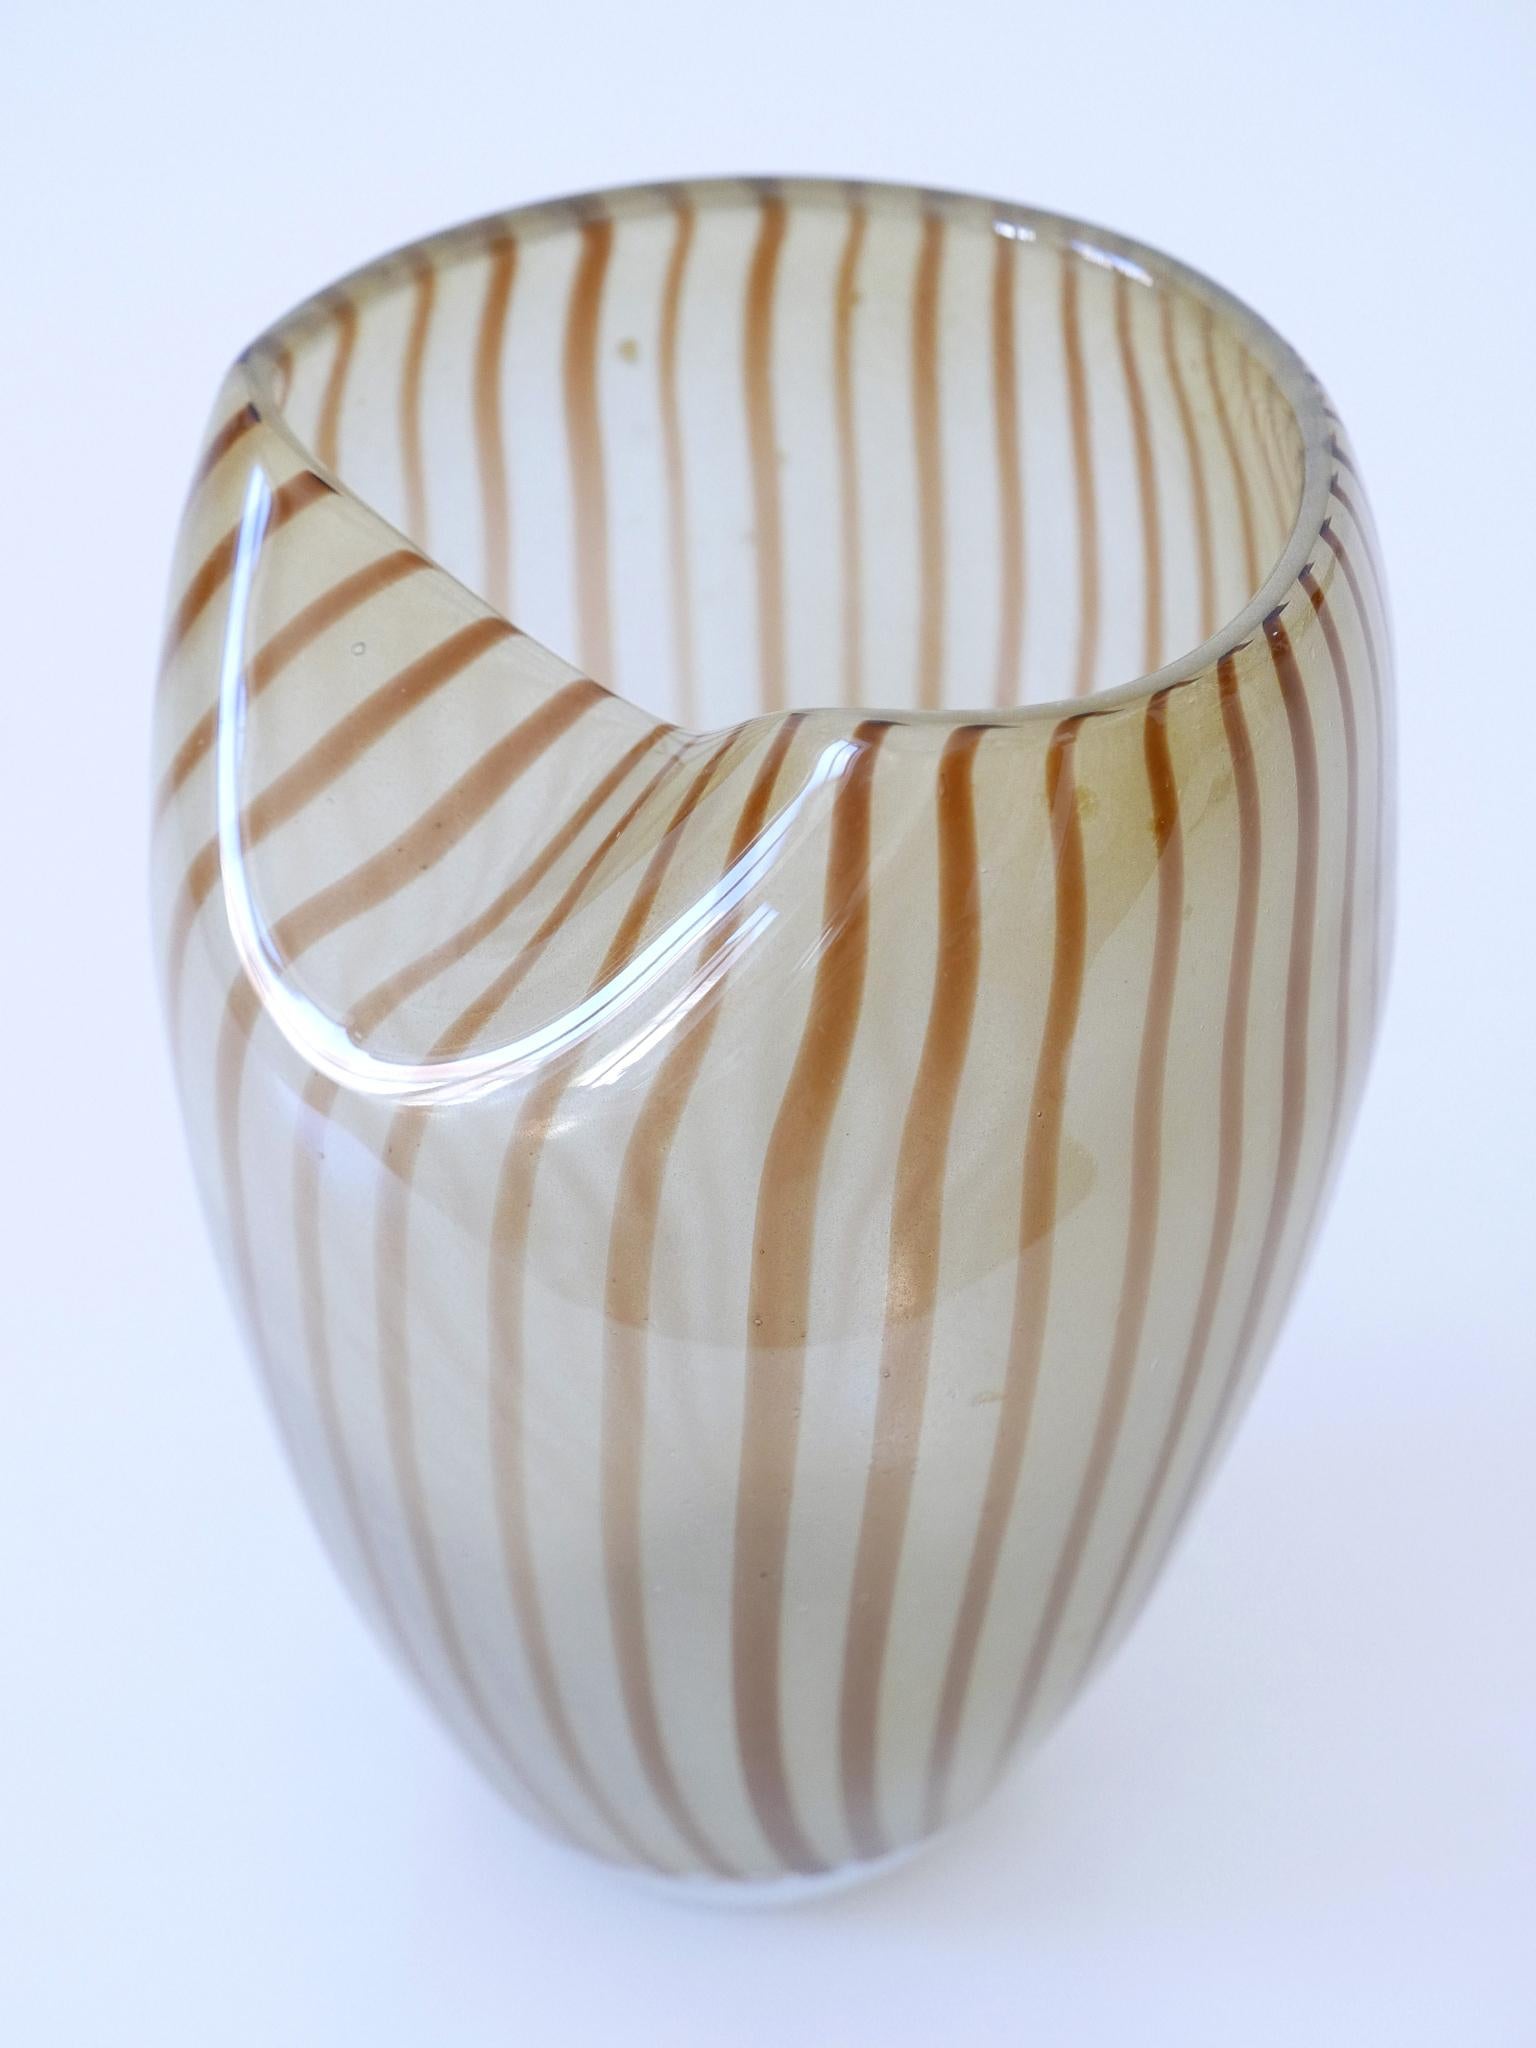 Decorative Mid Century Modern Murano Glass Vase Italy 1960s  For Sale 3